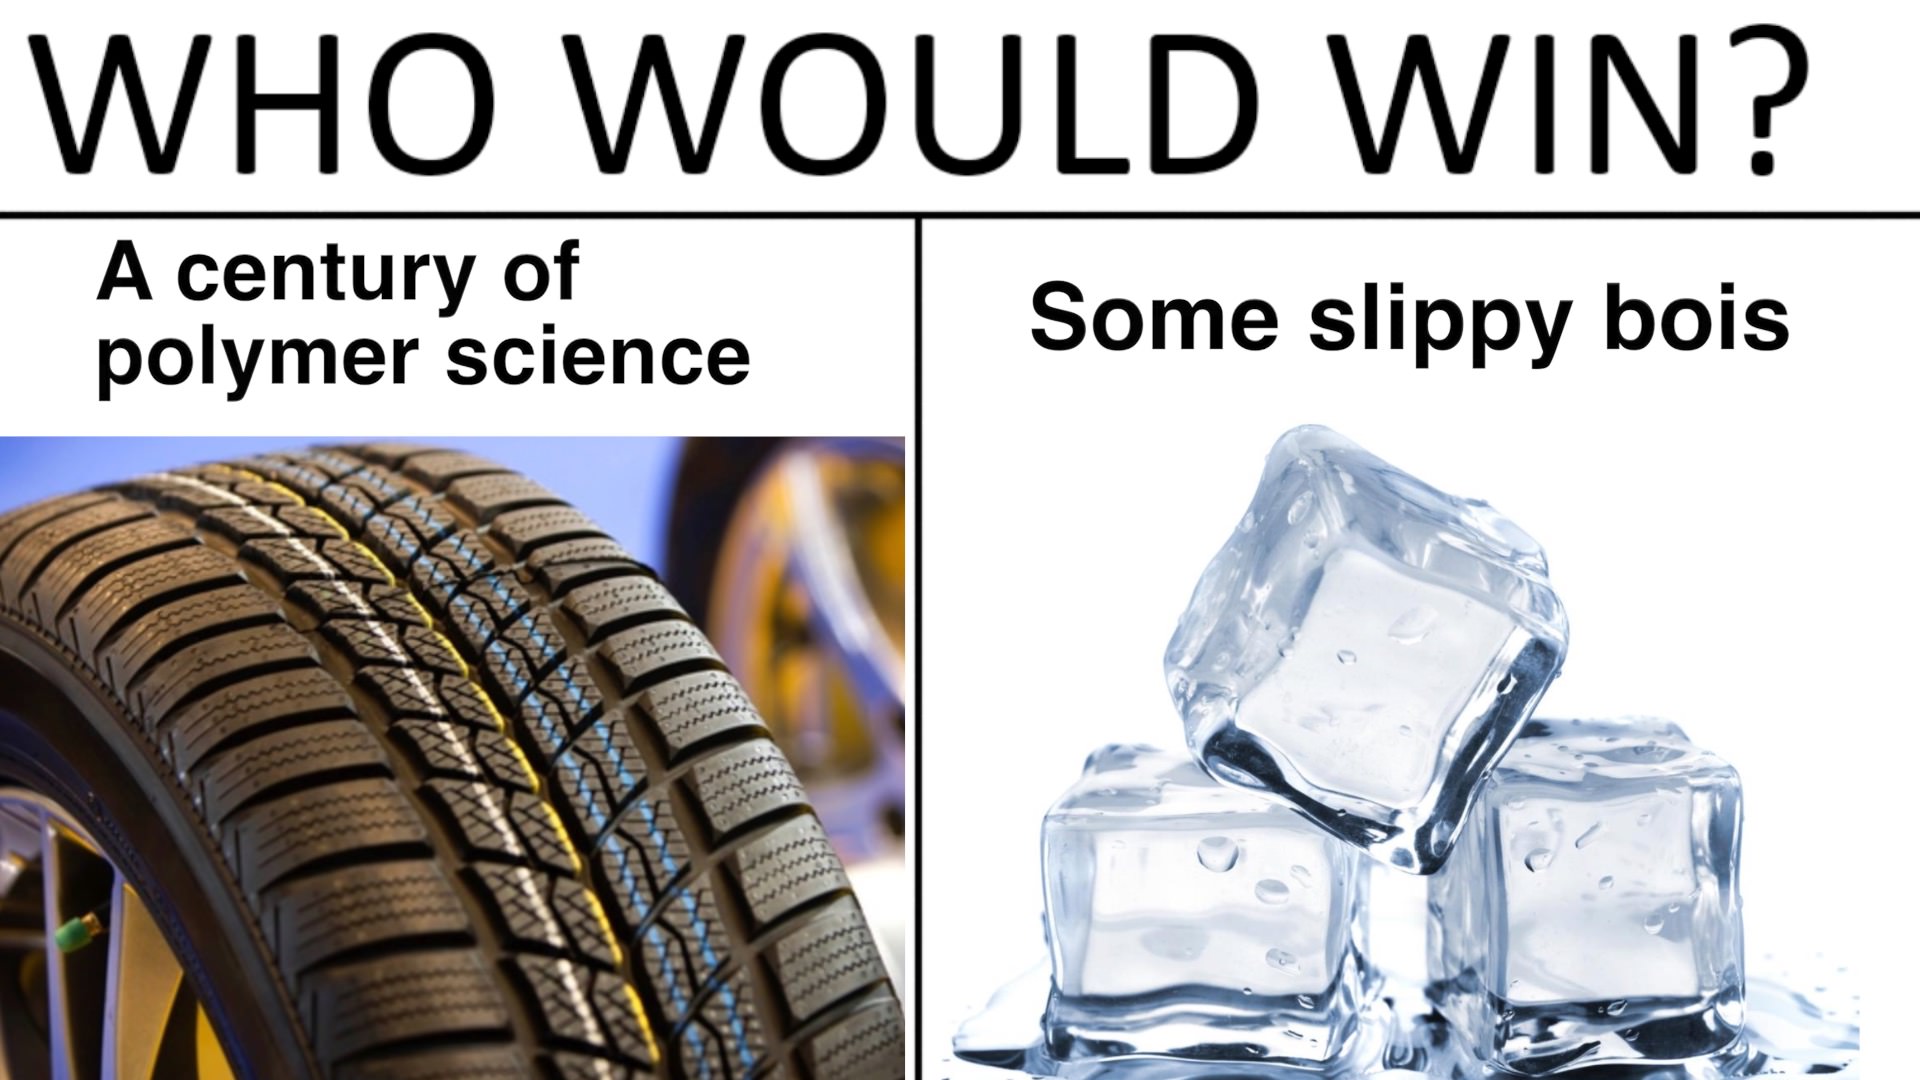 water ice cube - Who Would Win? A century of polymer science Some slippy bois akan